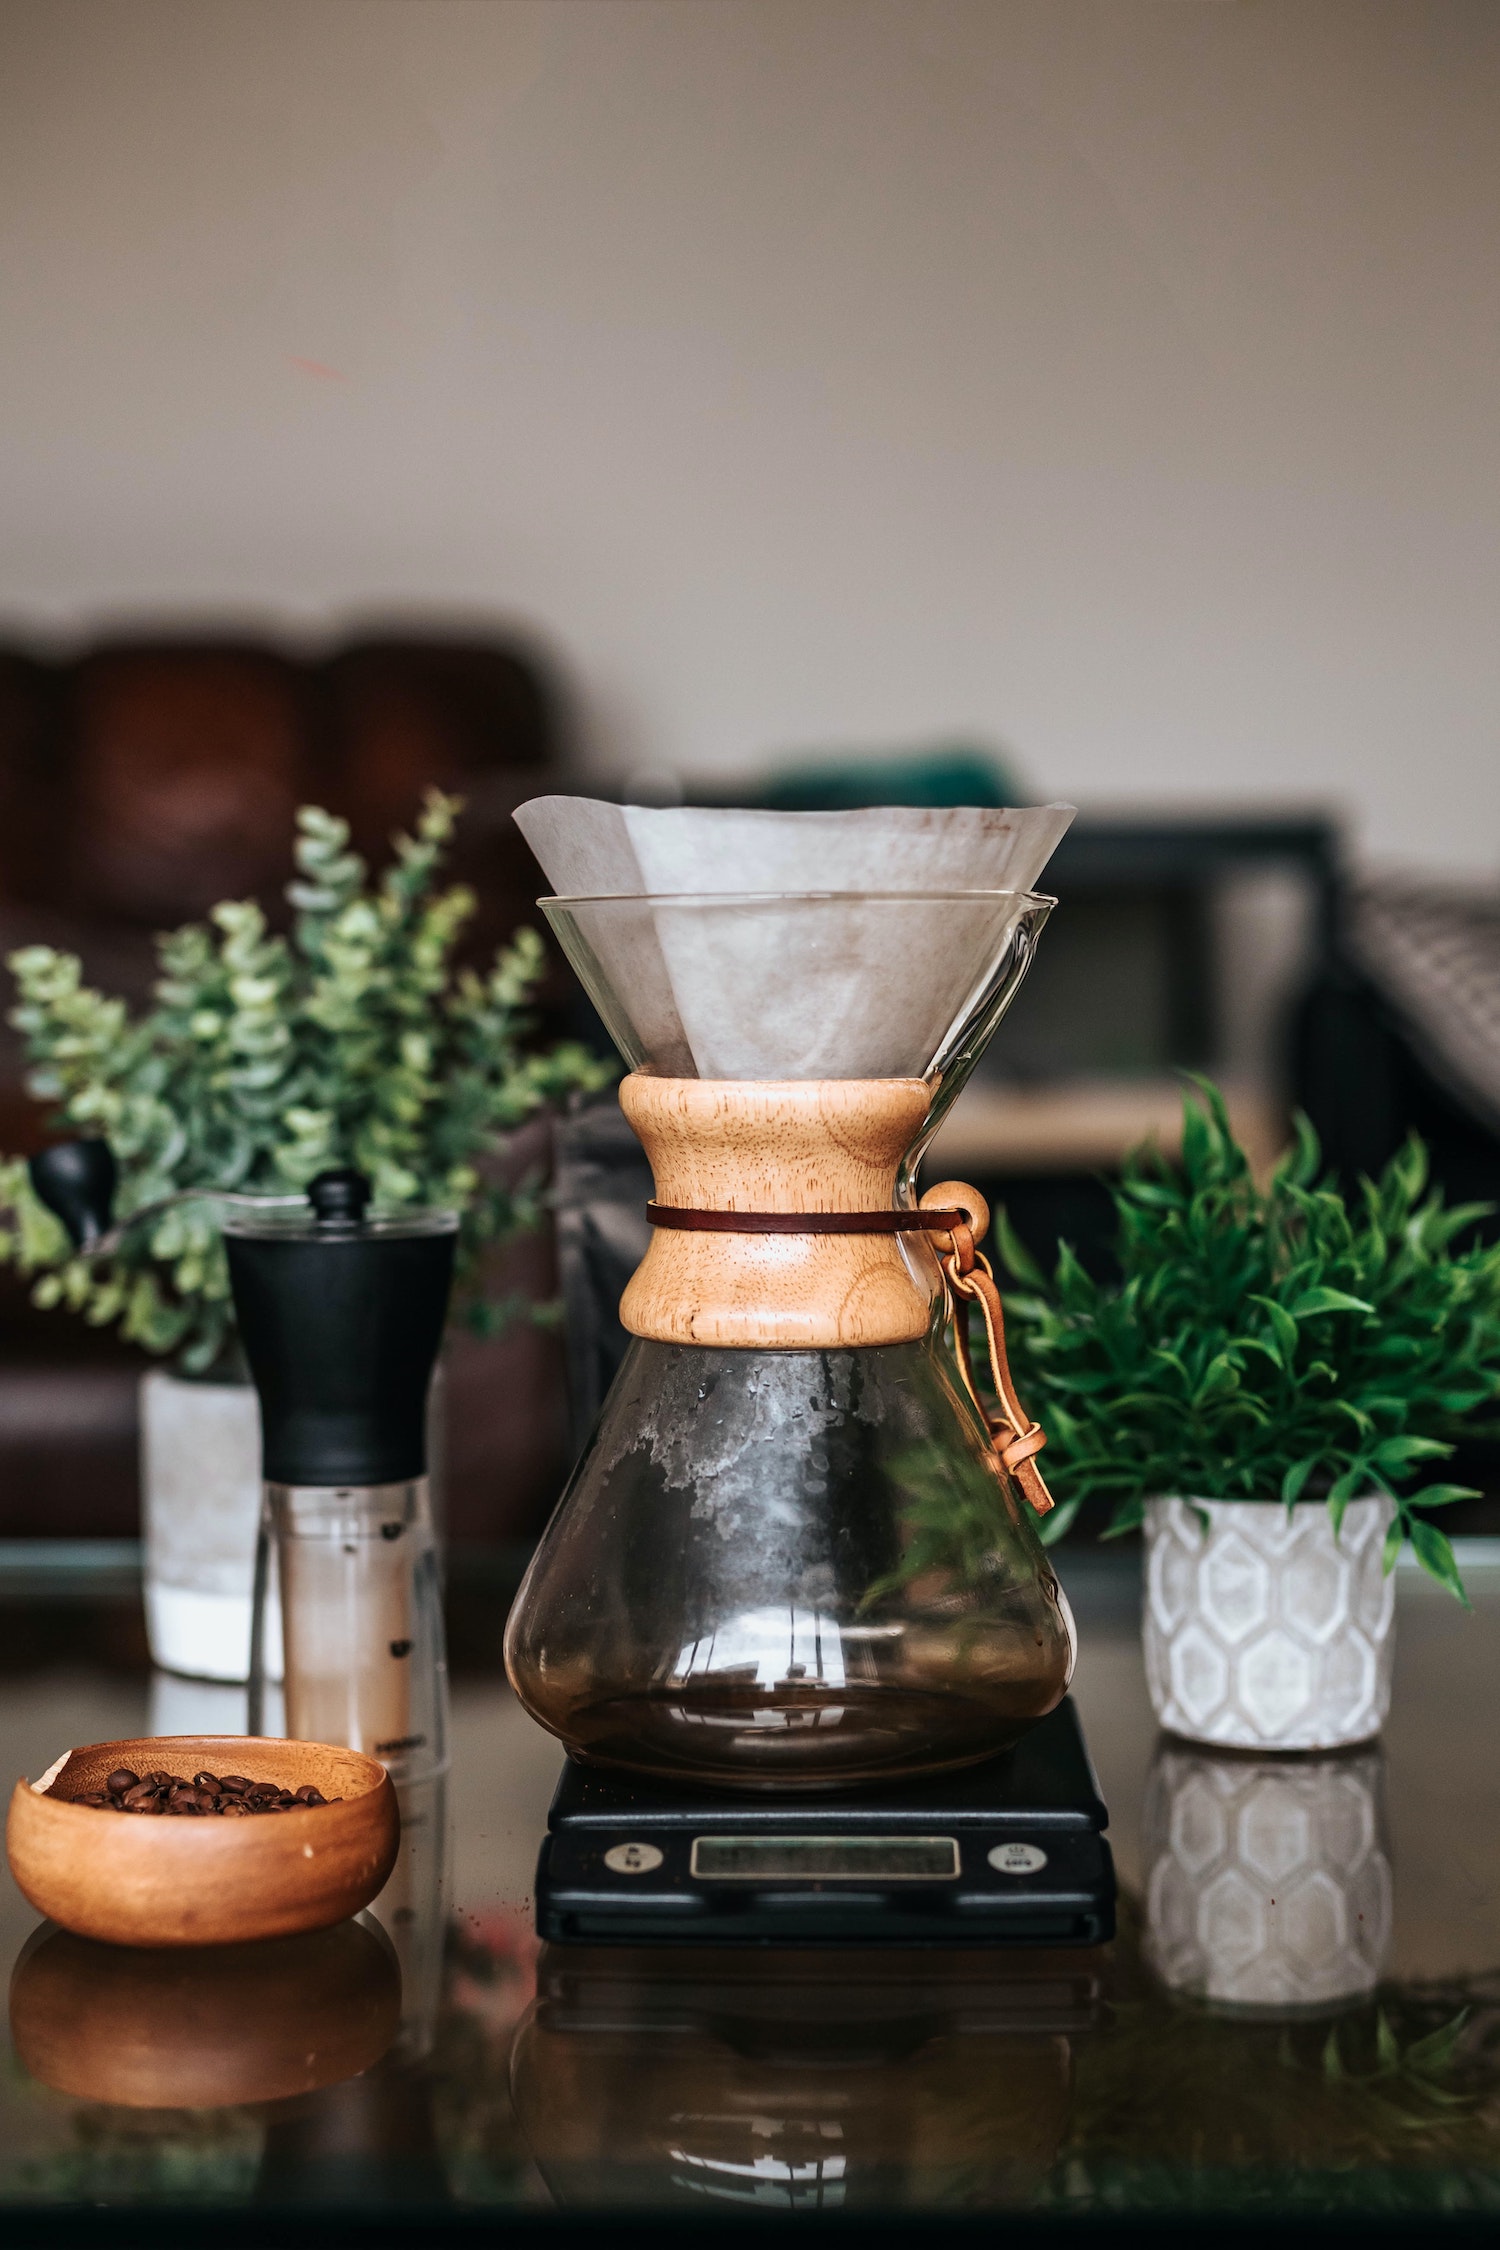 Brewing Coffee: 4 Tips for Making the Perfect Coffee